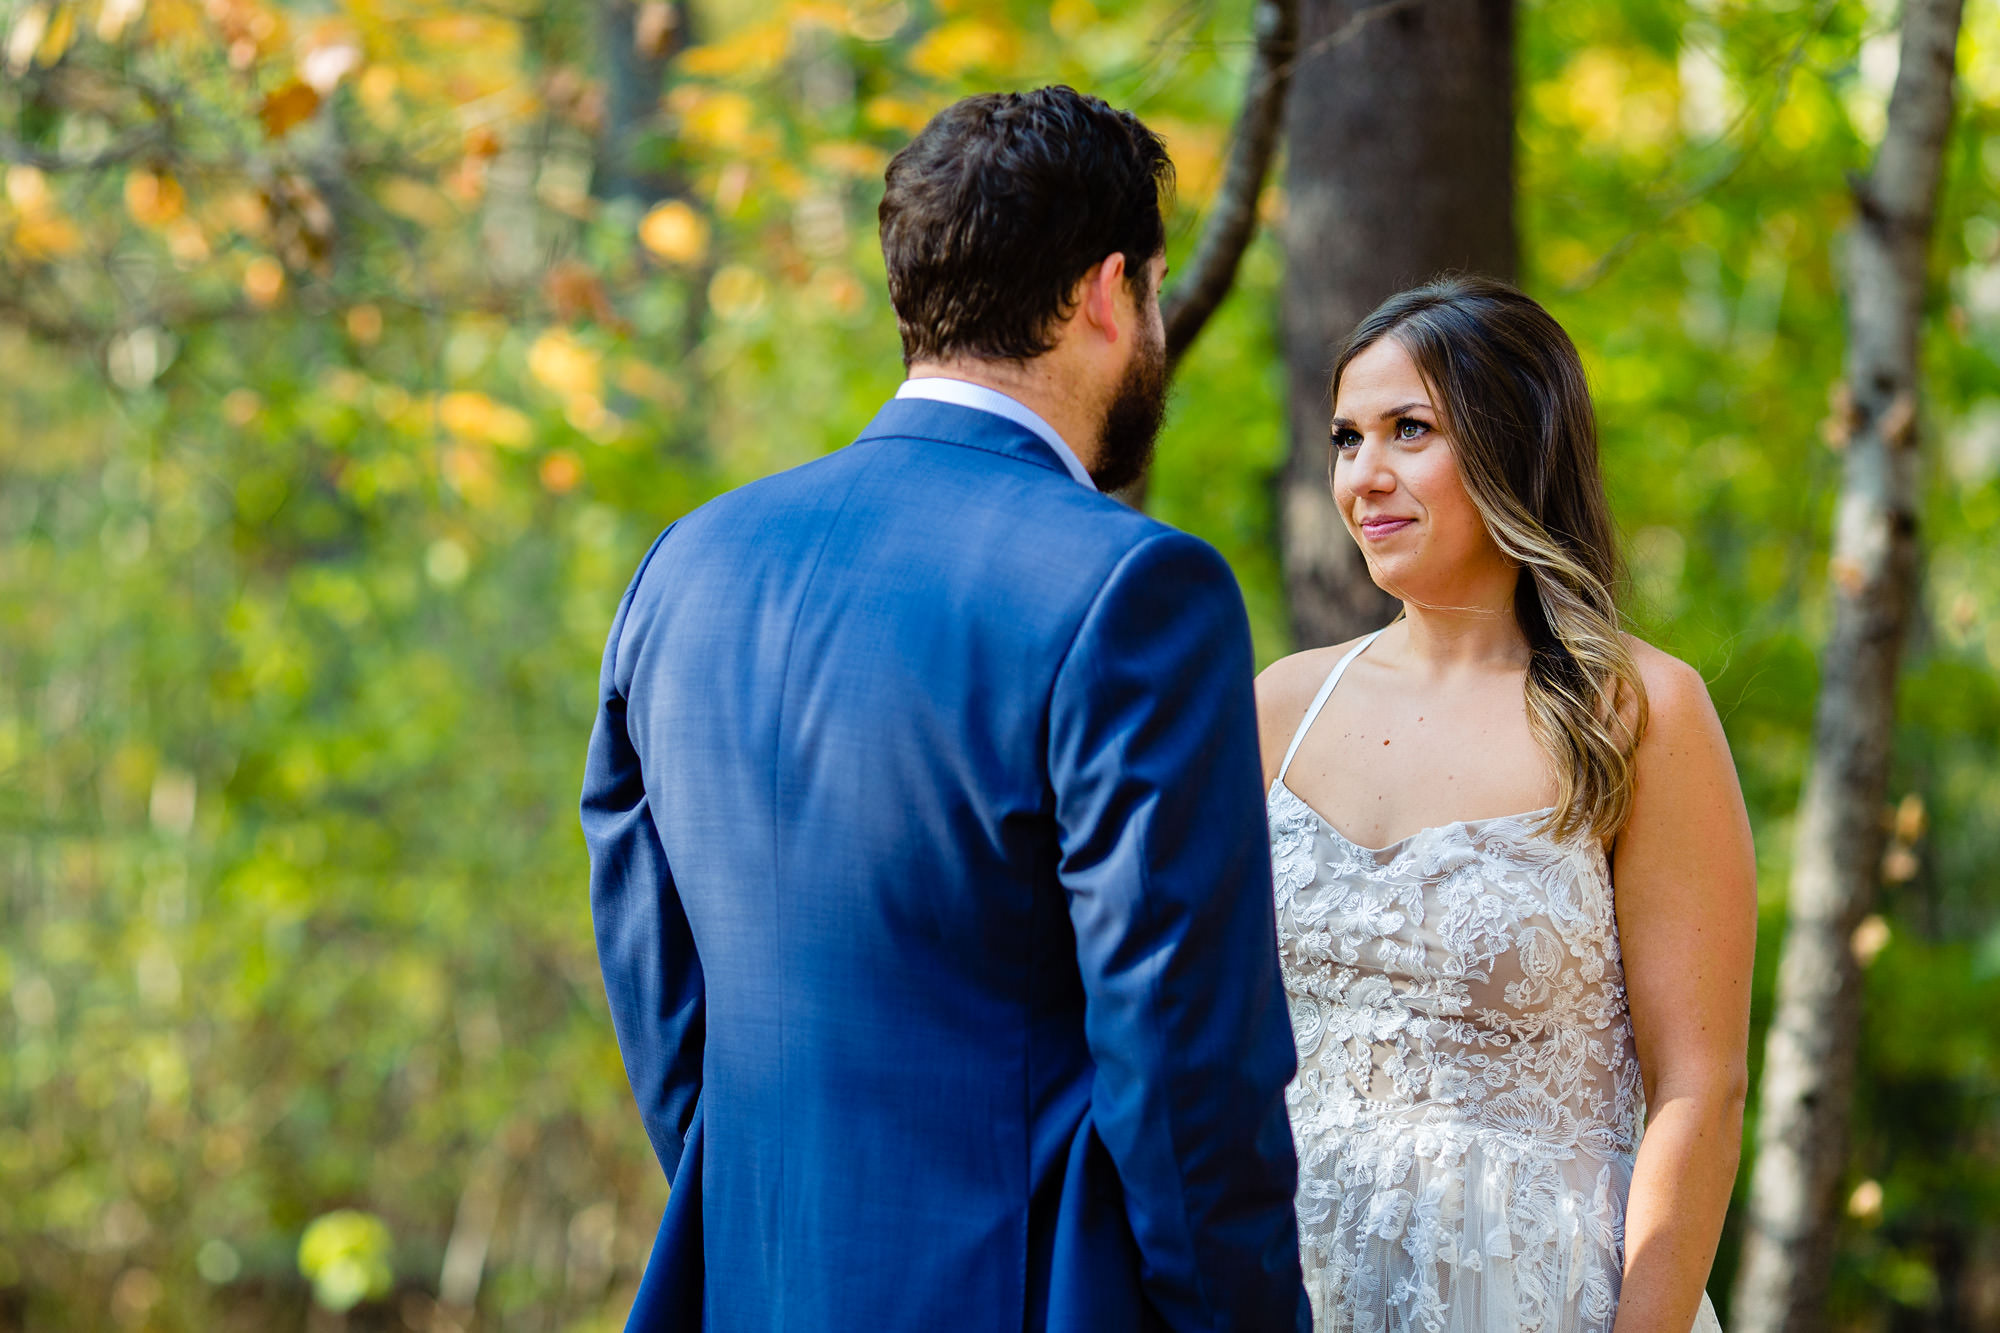 The bride and groom share a first look at their wedding at Barn at Flanagan Farm in Maine